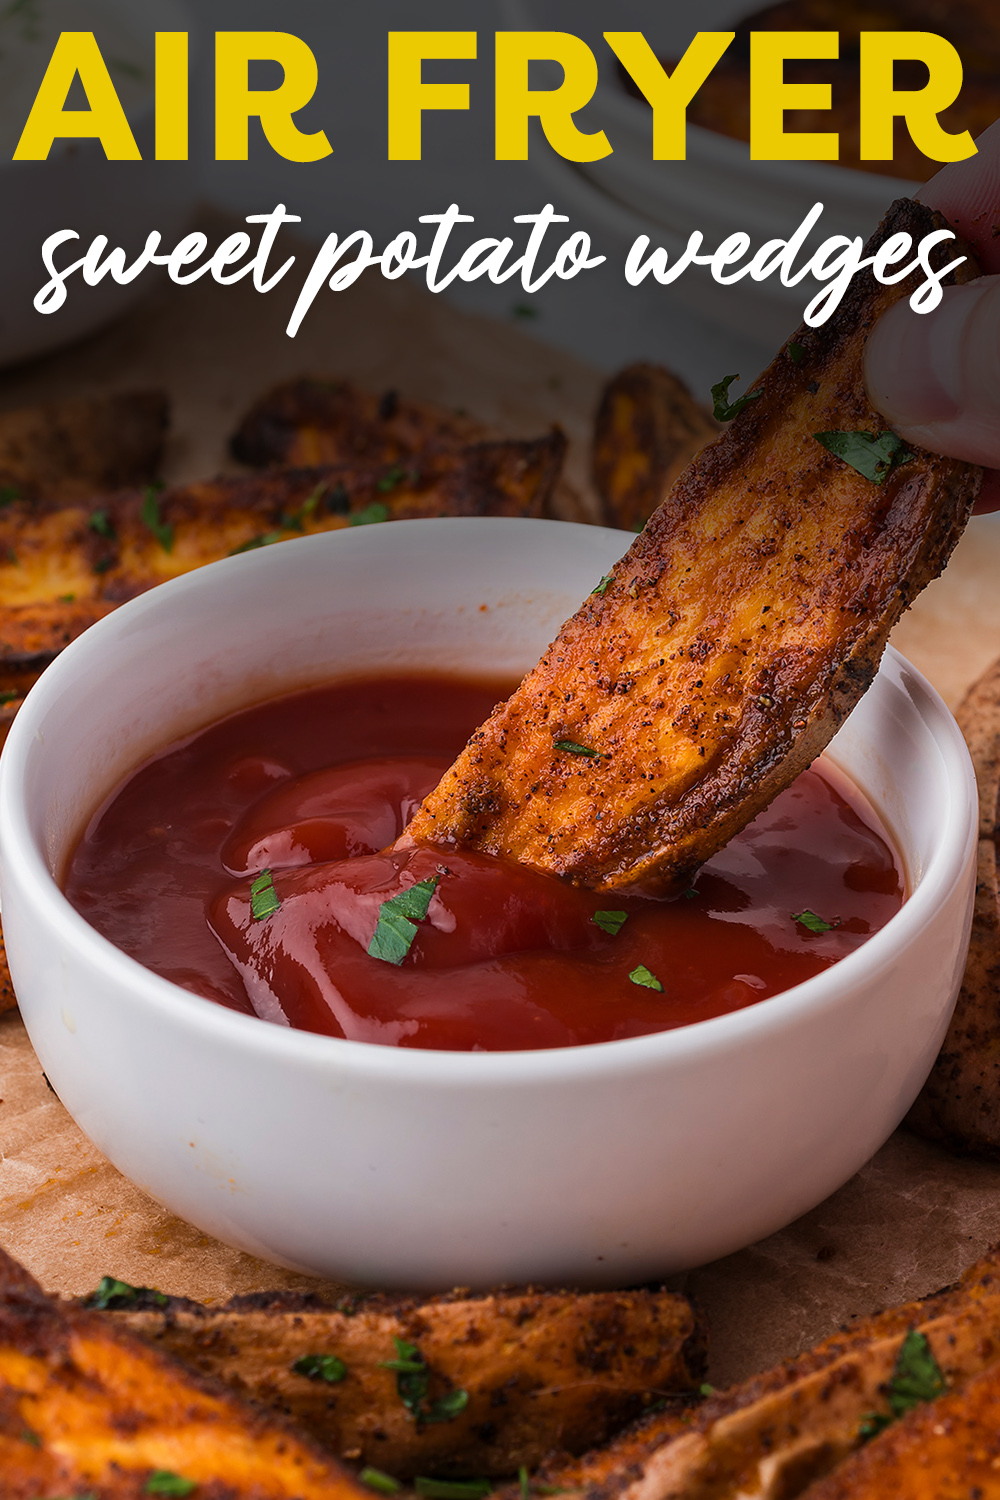 A sweet potato wedge dipped in ketchup.